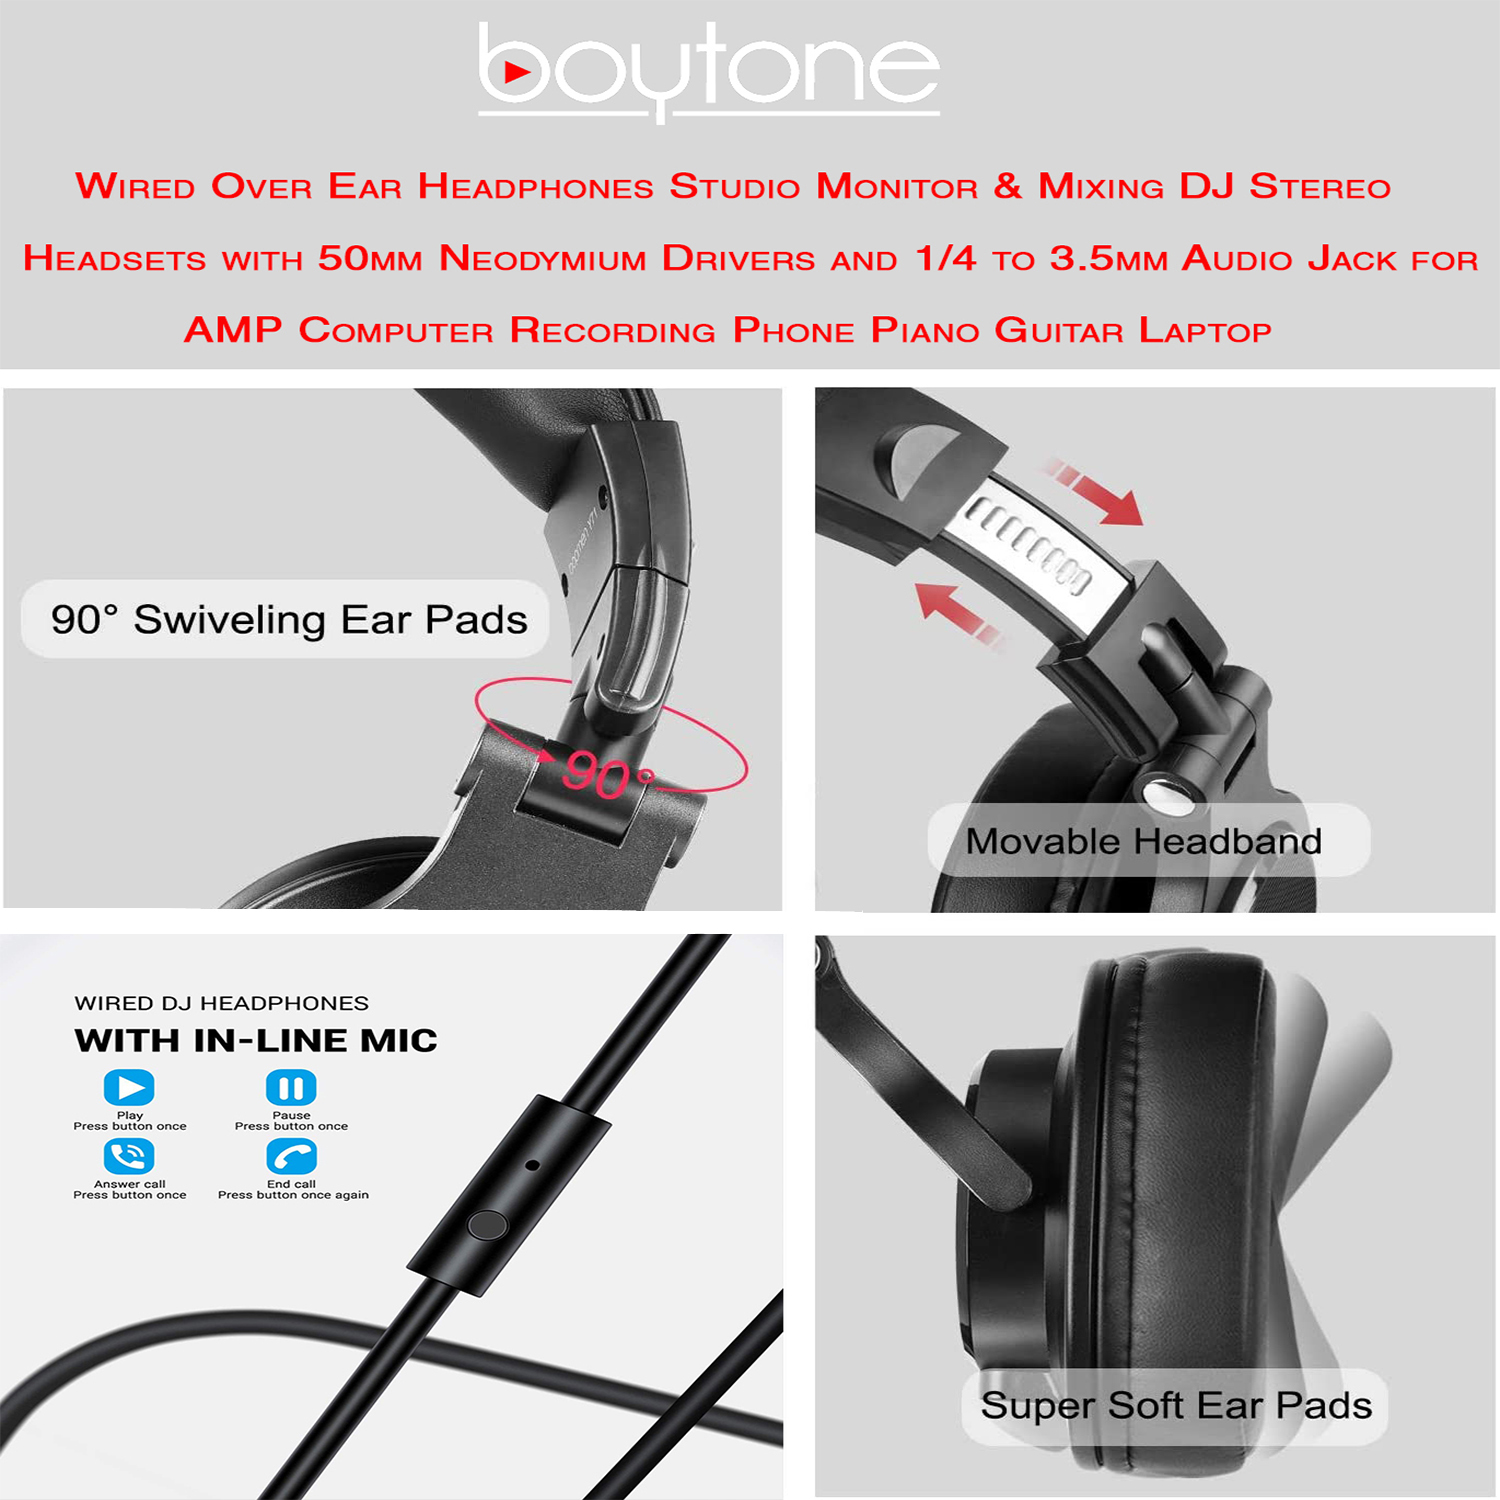 Boytone BT-10BK Wired Over Ear Headphones Studio Monitor & Mixing DJ Stereo Headsets with 50mm Drivers